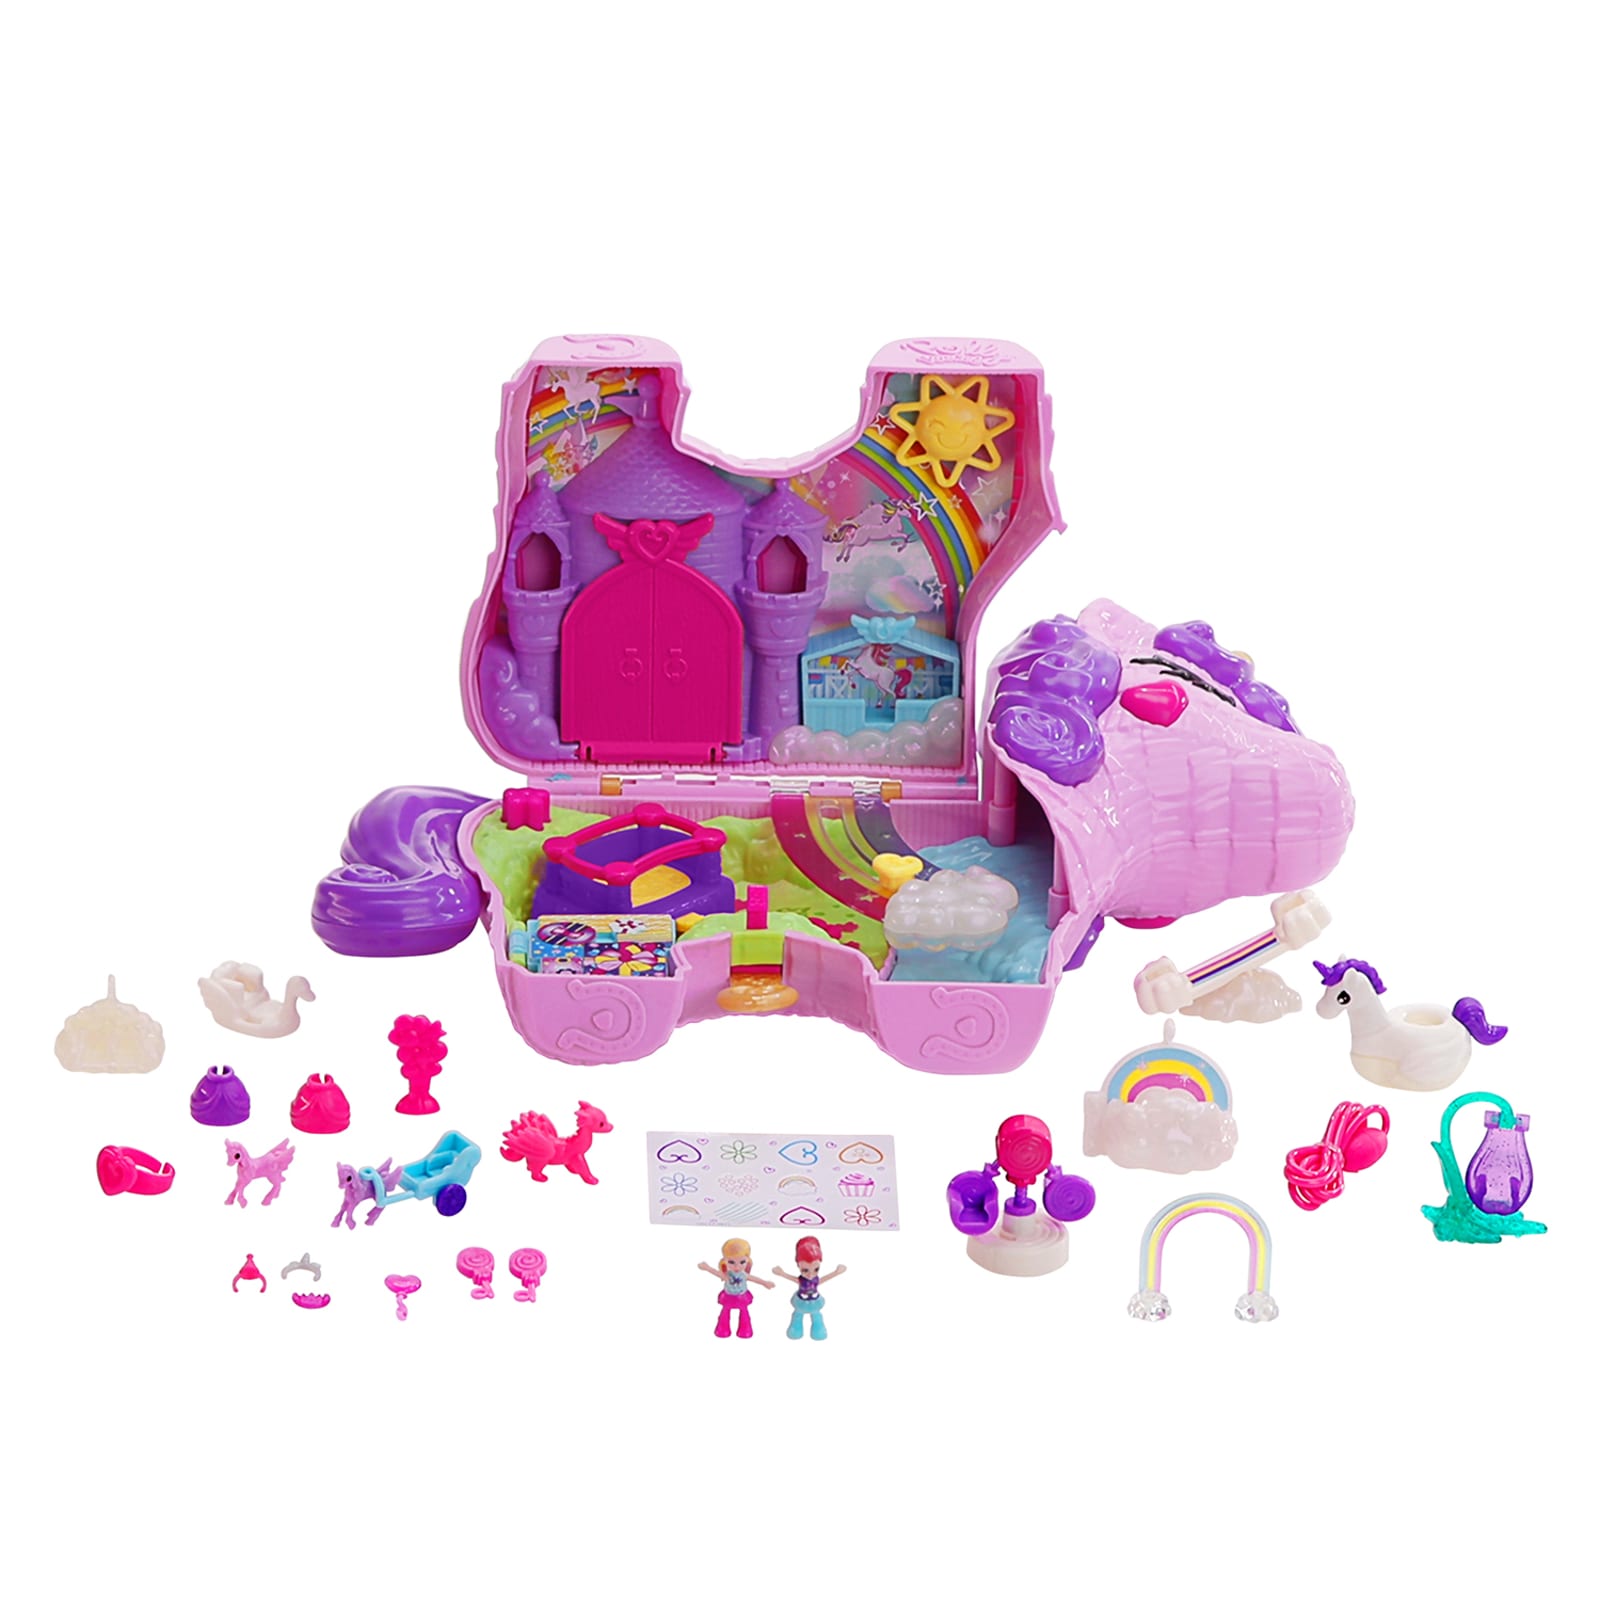 NEW Polly Pocket Unicorn Party Large Compact, Polly & Lila Dolls & 25+  Surprises